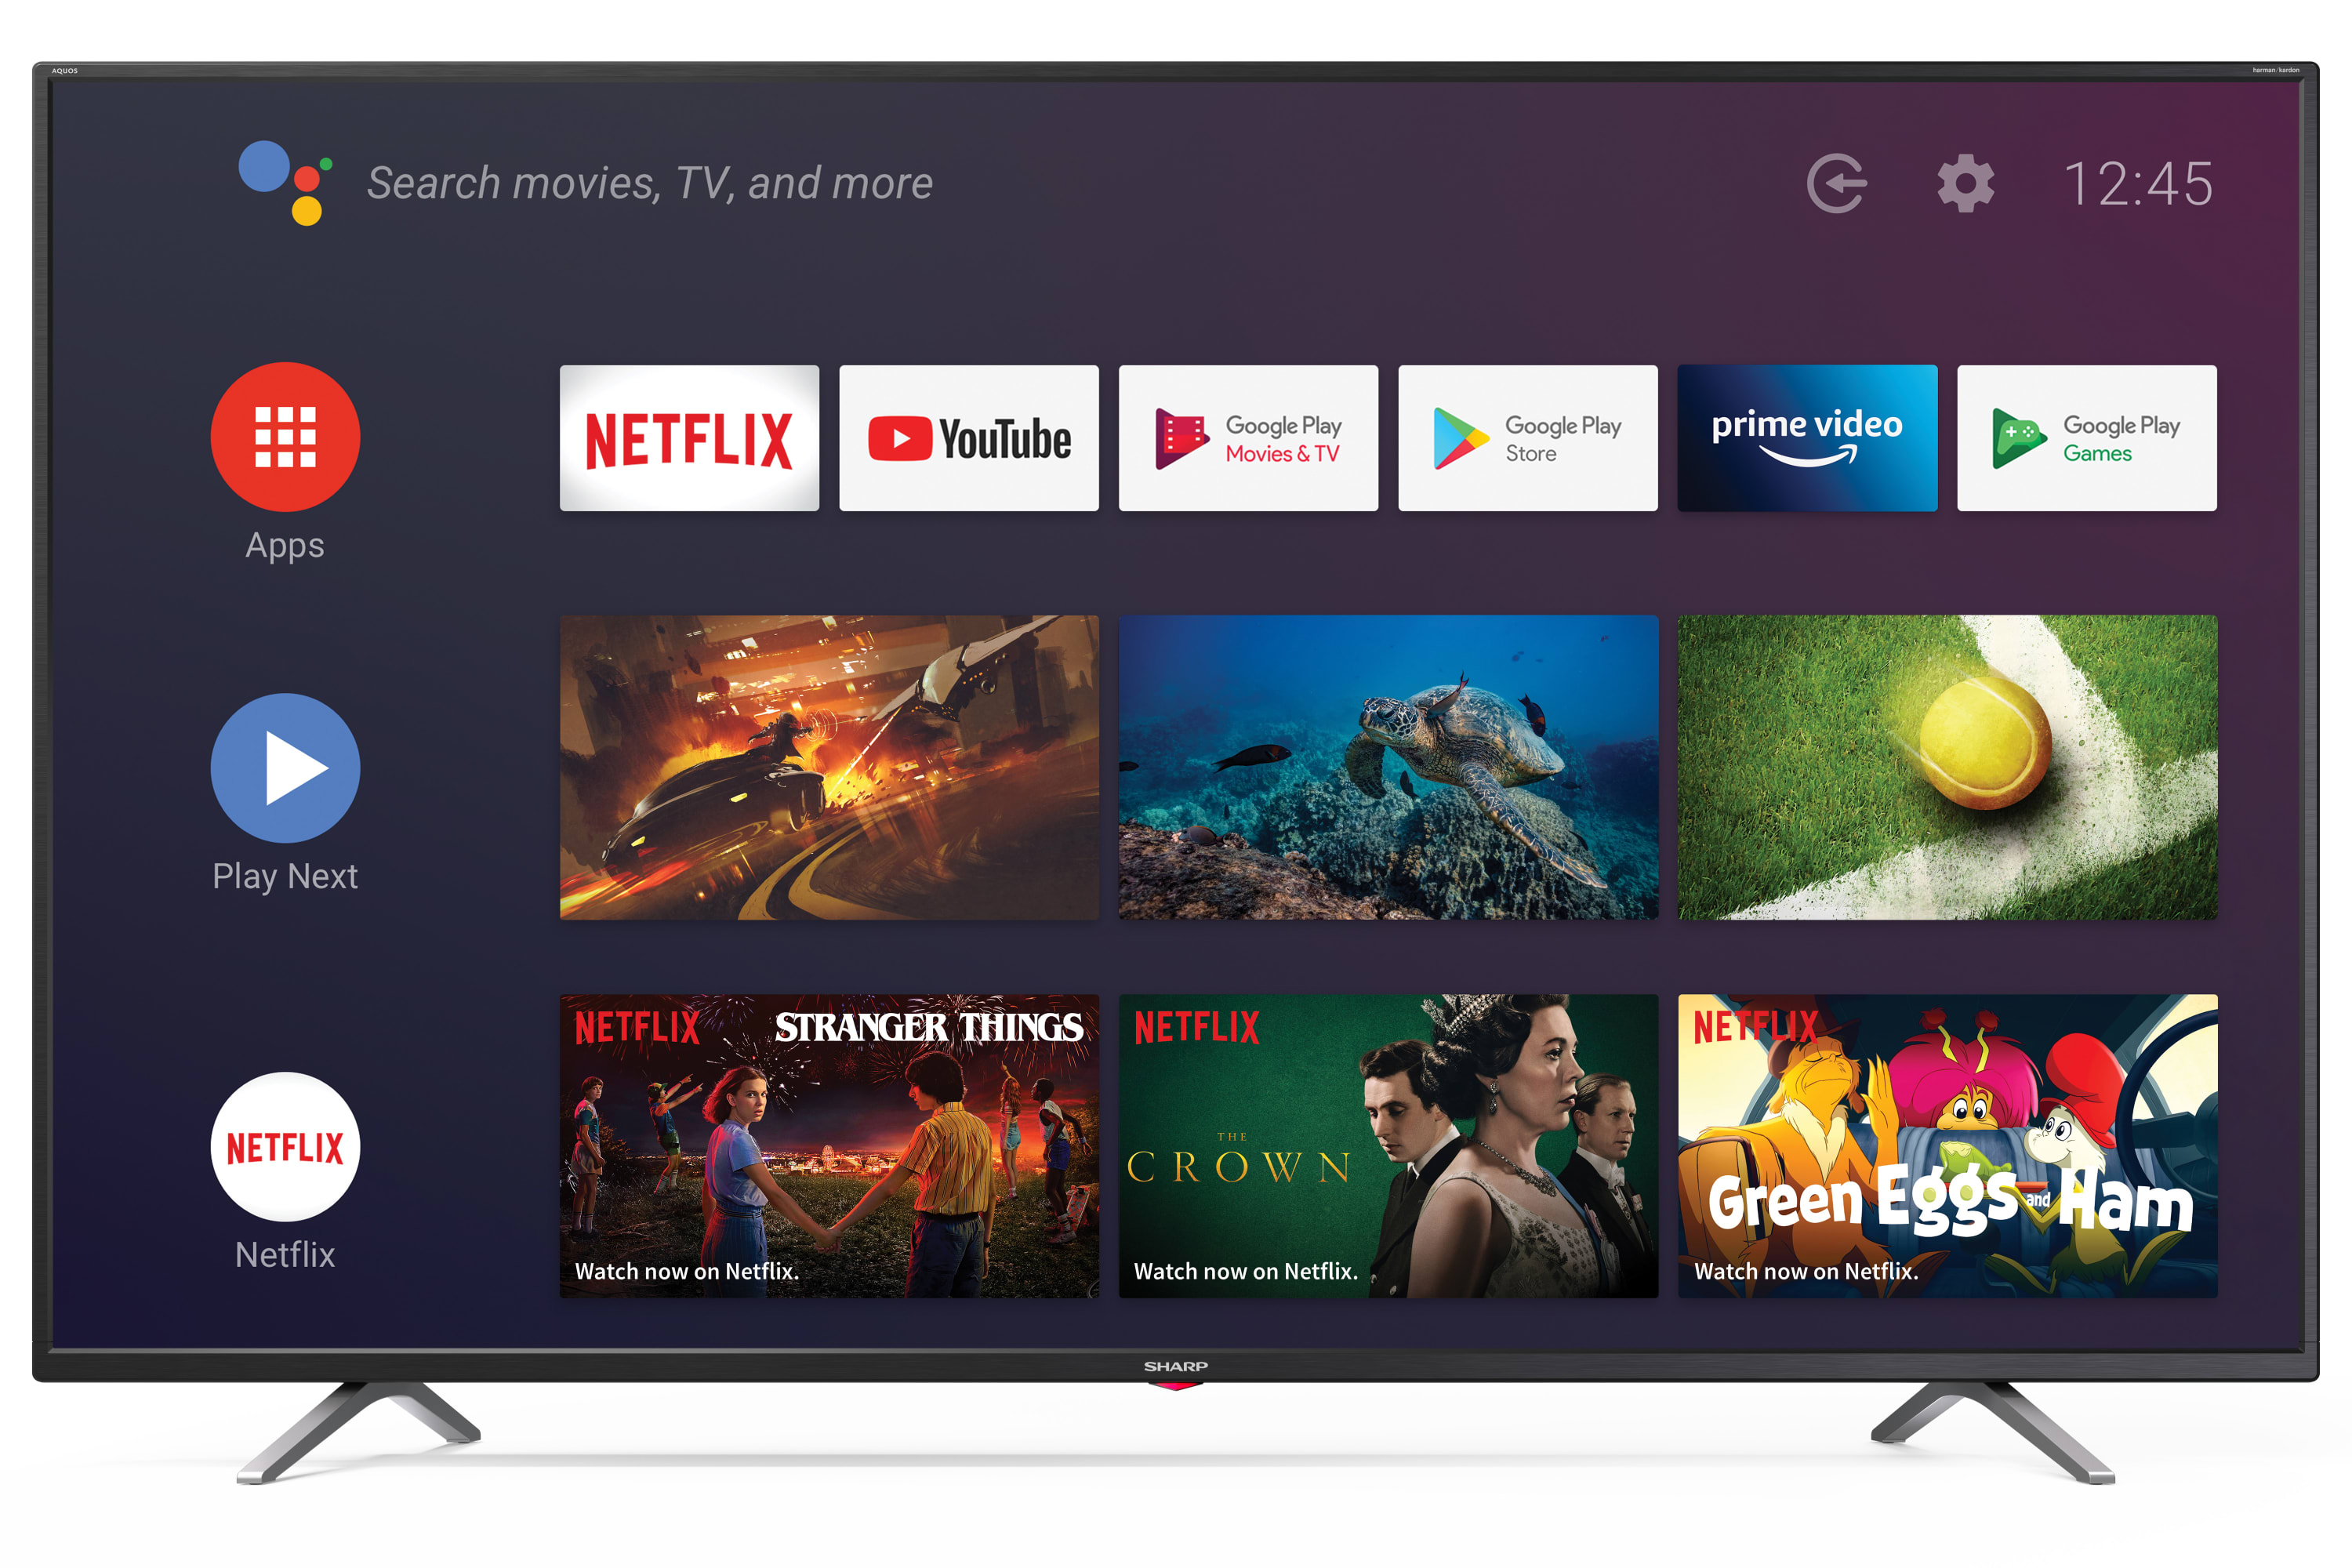 Android TV 4K UHD - ANDROID TV™ 65" 4K ULTRA HD